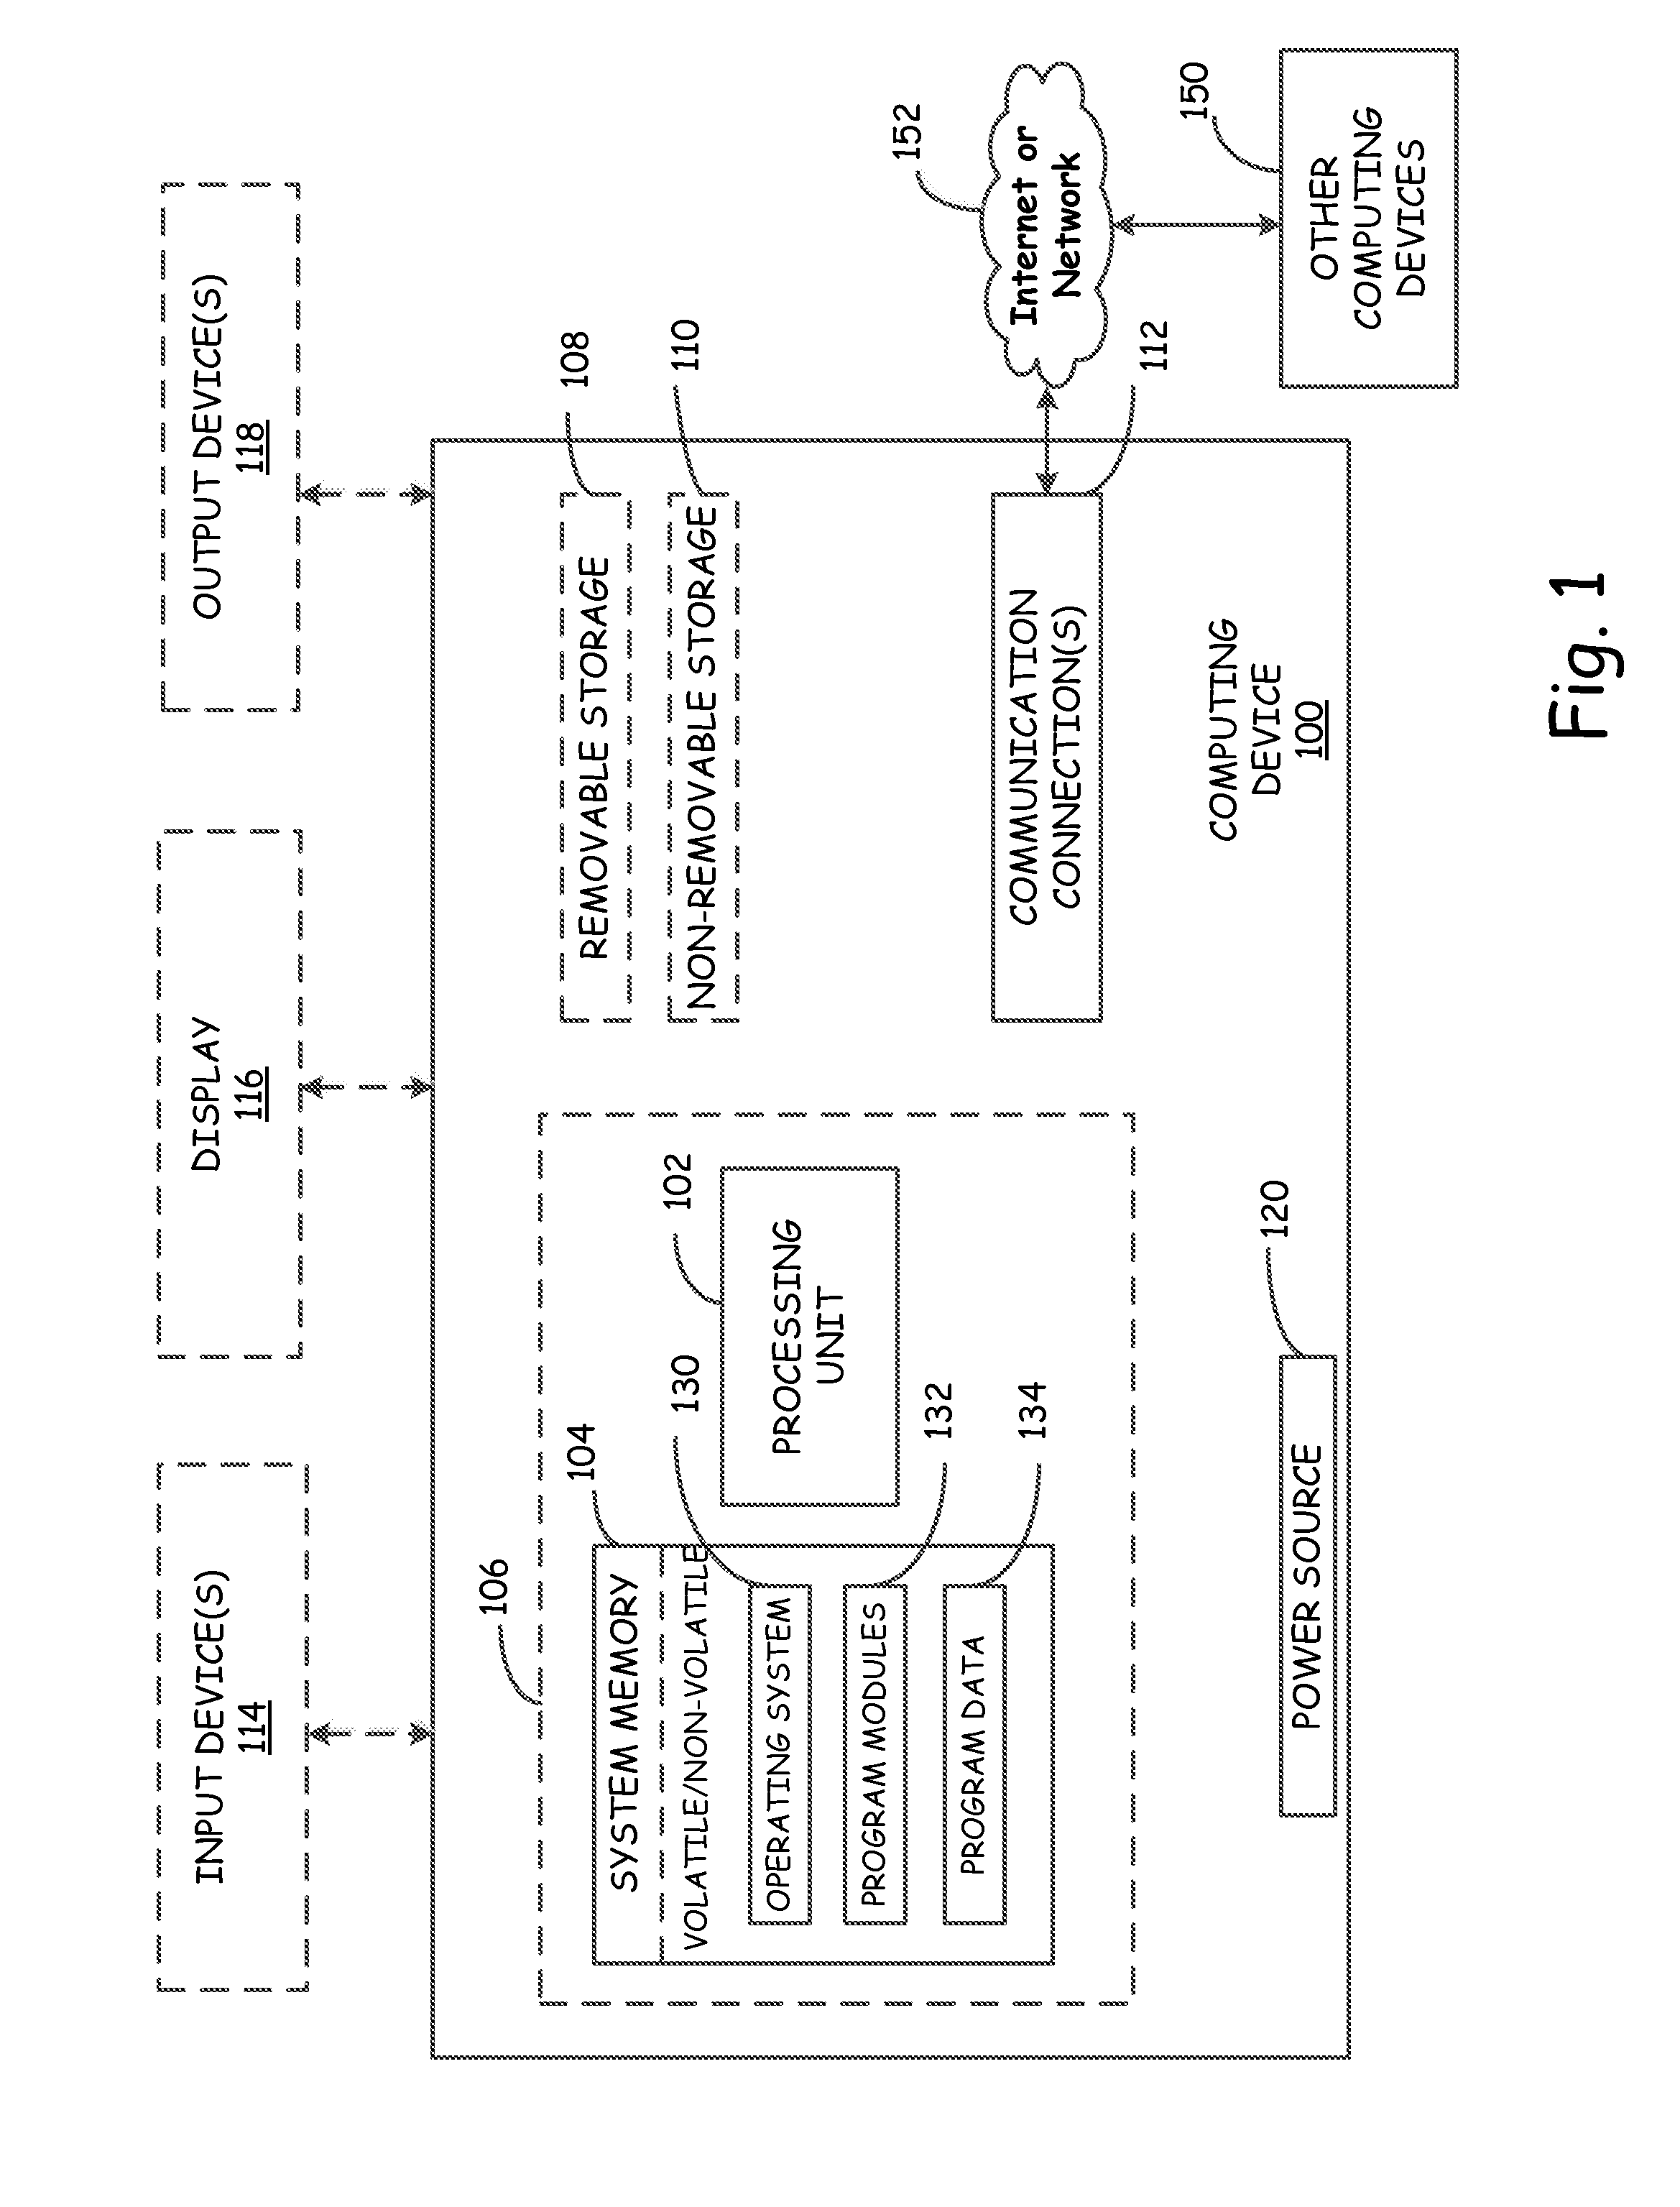 Gateway system and process for IP enabled devices